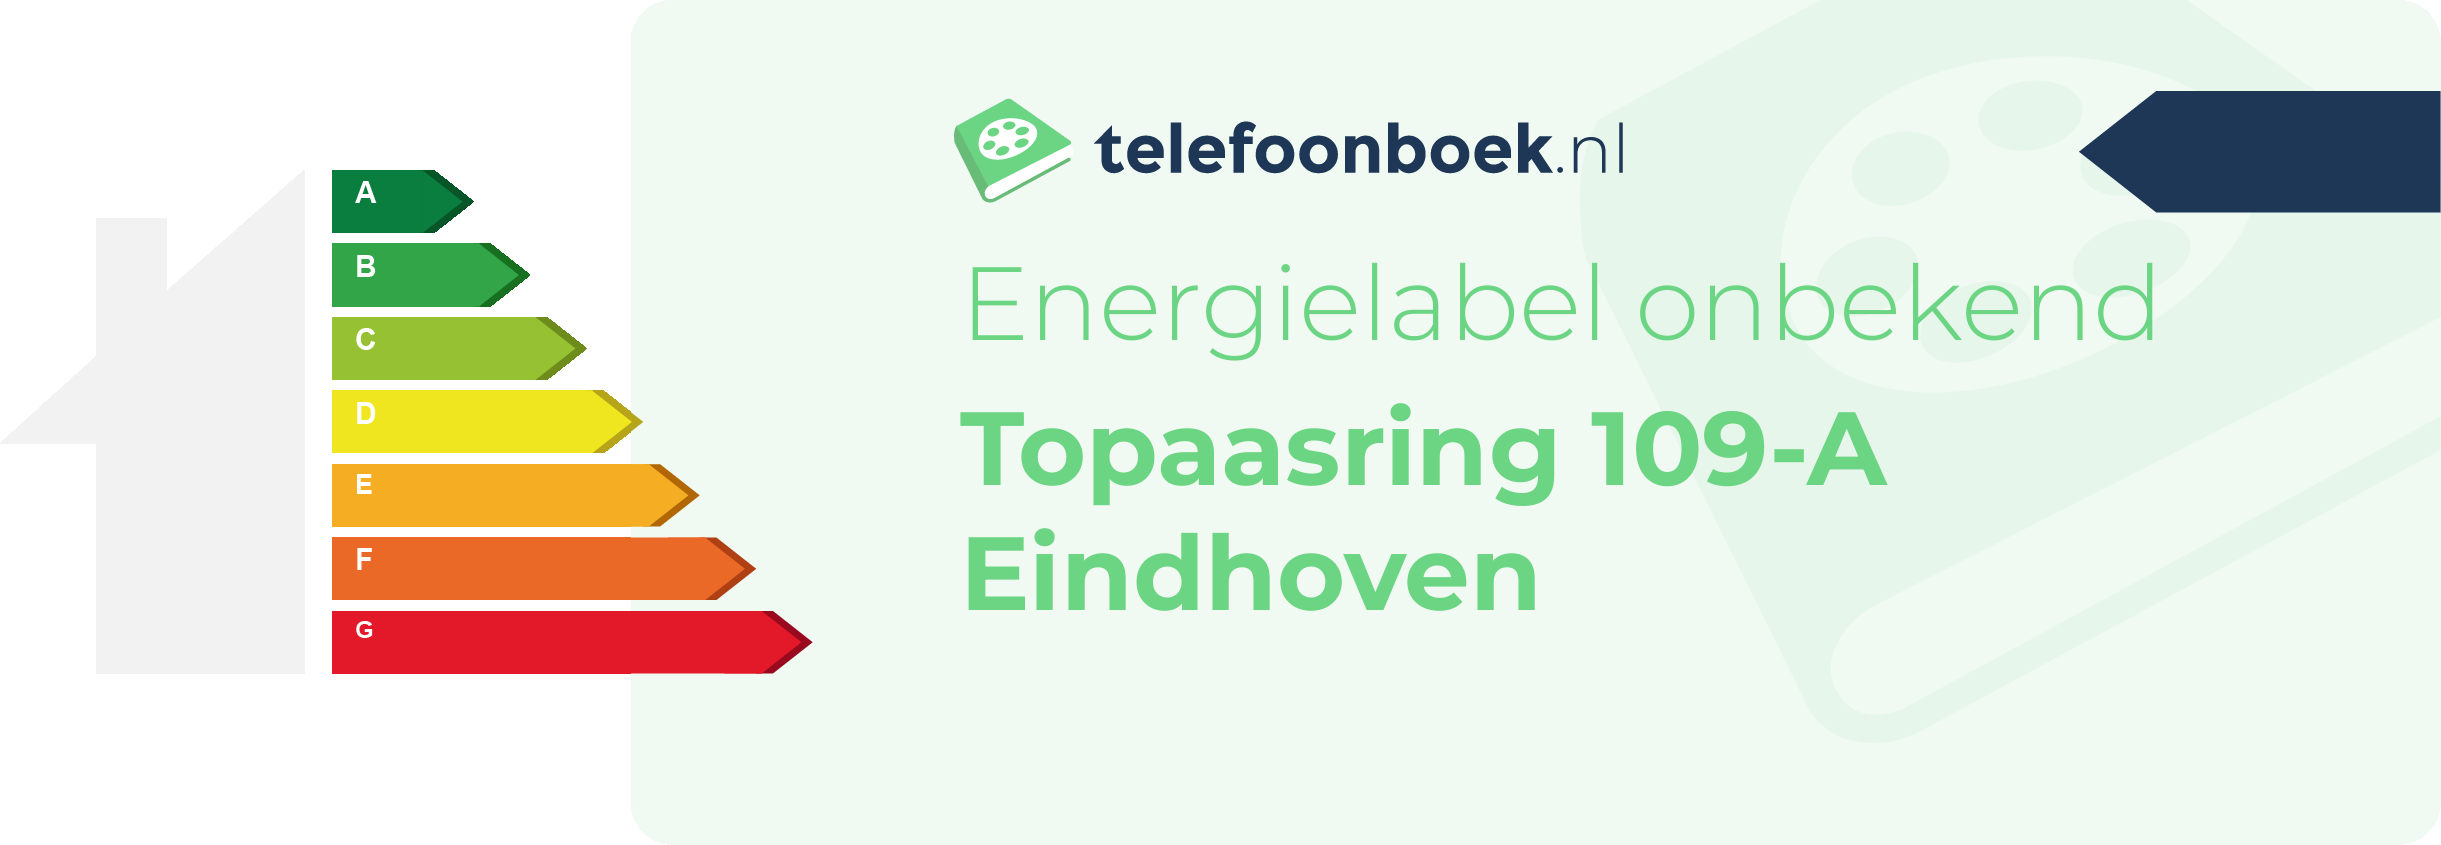 Energielabel Topaasring 109-A Eindhoven